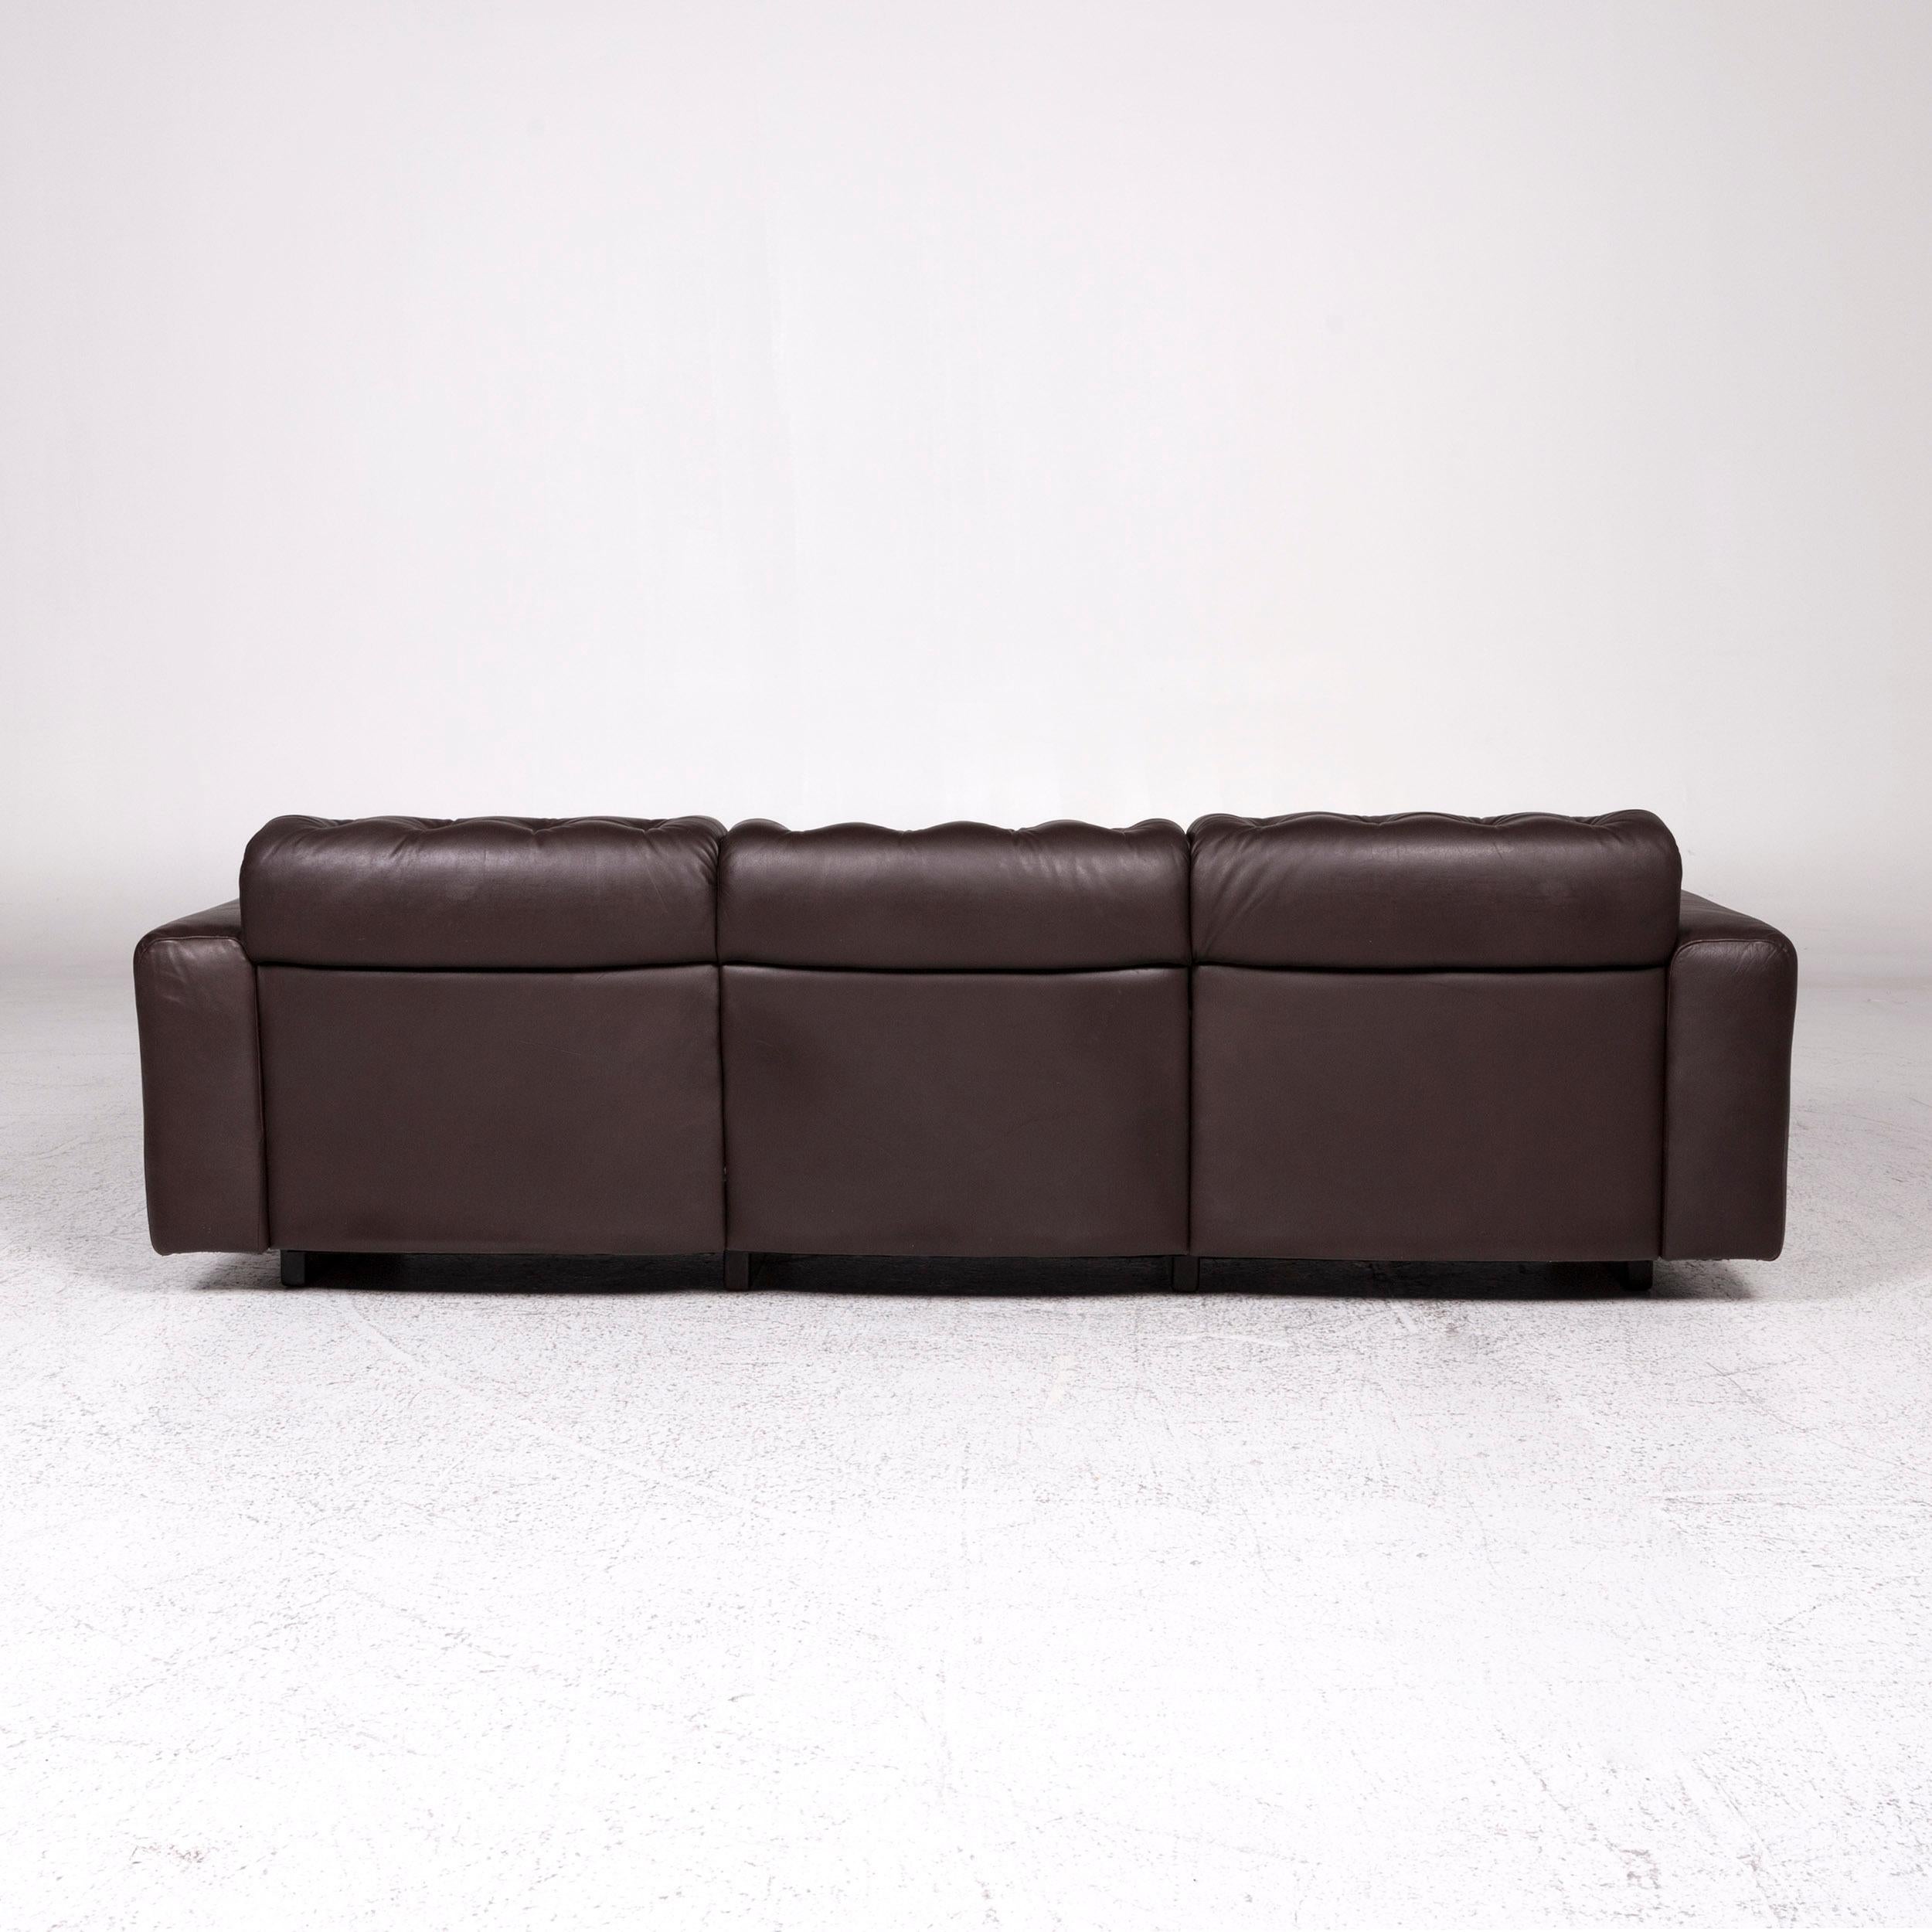 De Sede Leather Sofa Set Brown 1x Three Seater 1x Two Seater 2x Armchair 3